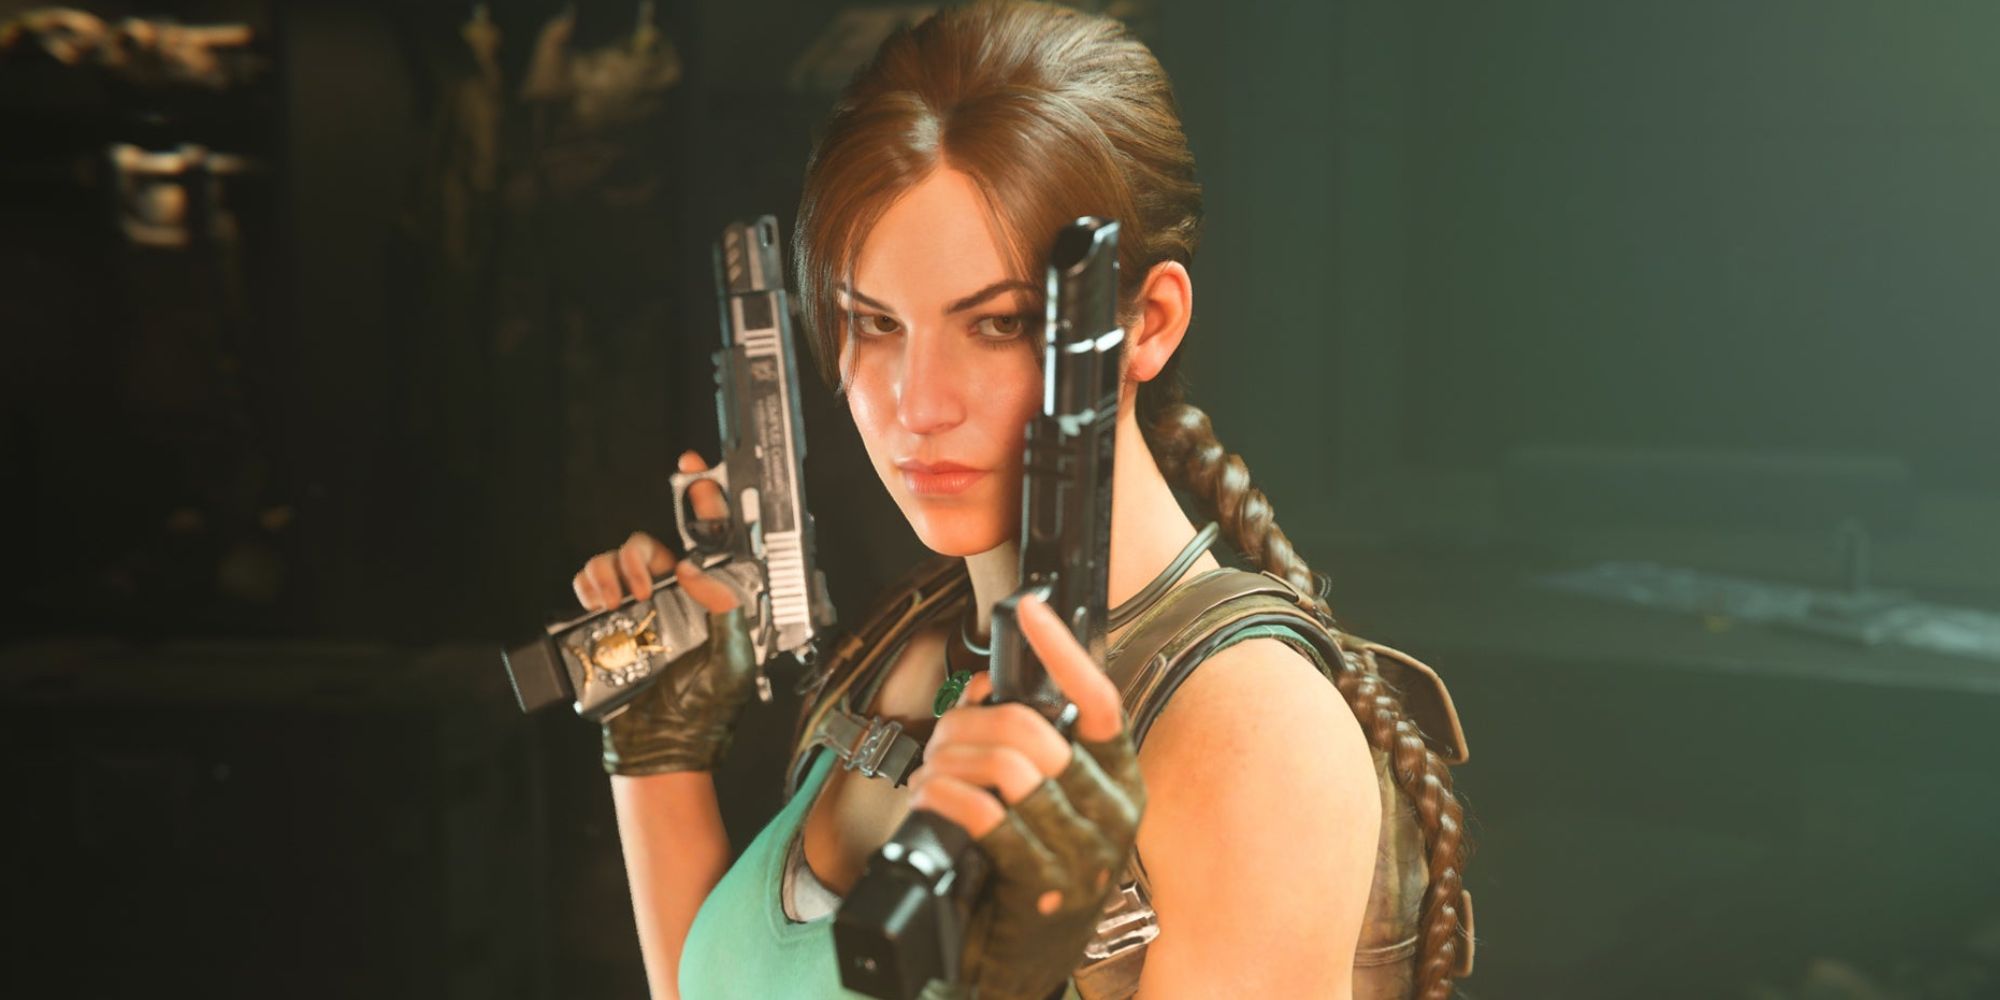 Lara Croft has her iconic brunette braid, dual wielding pistols, and turquise tank top